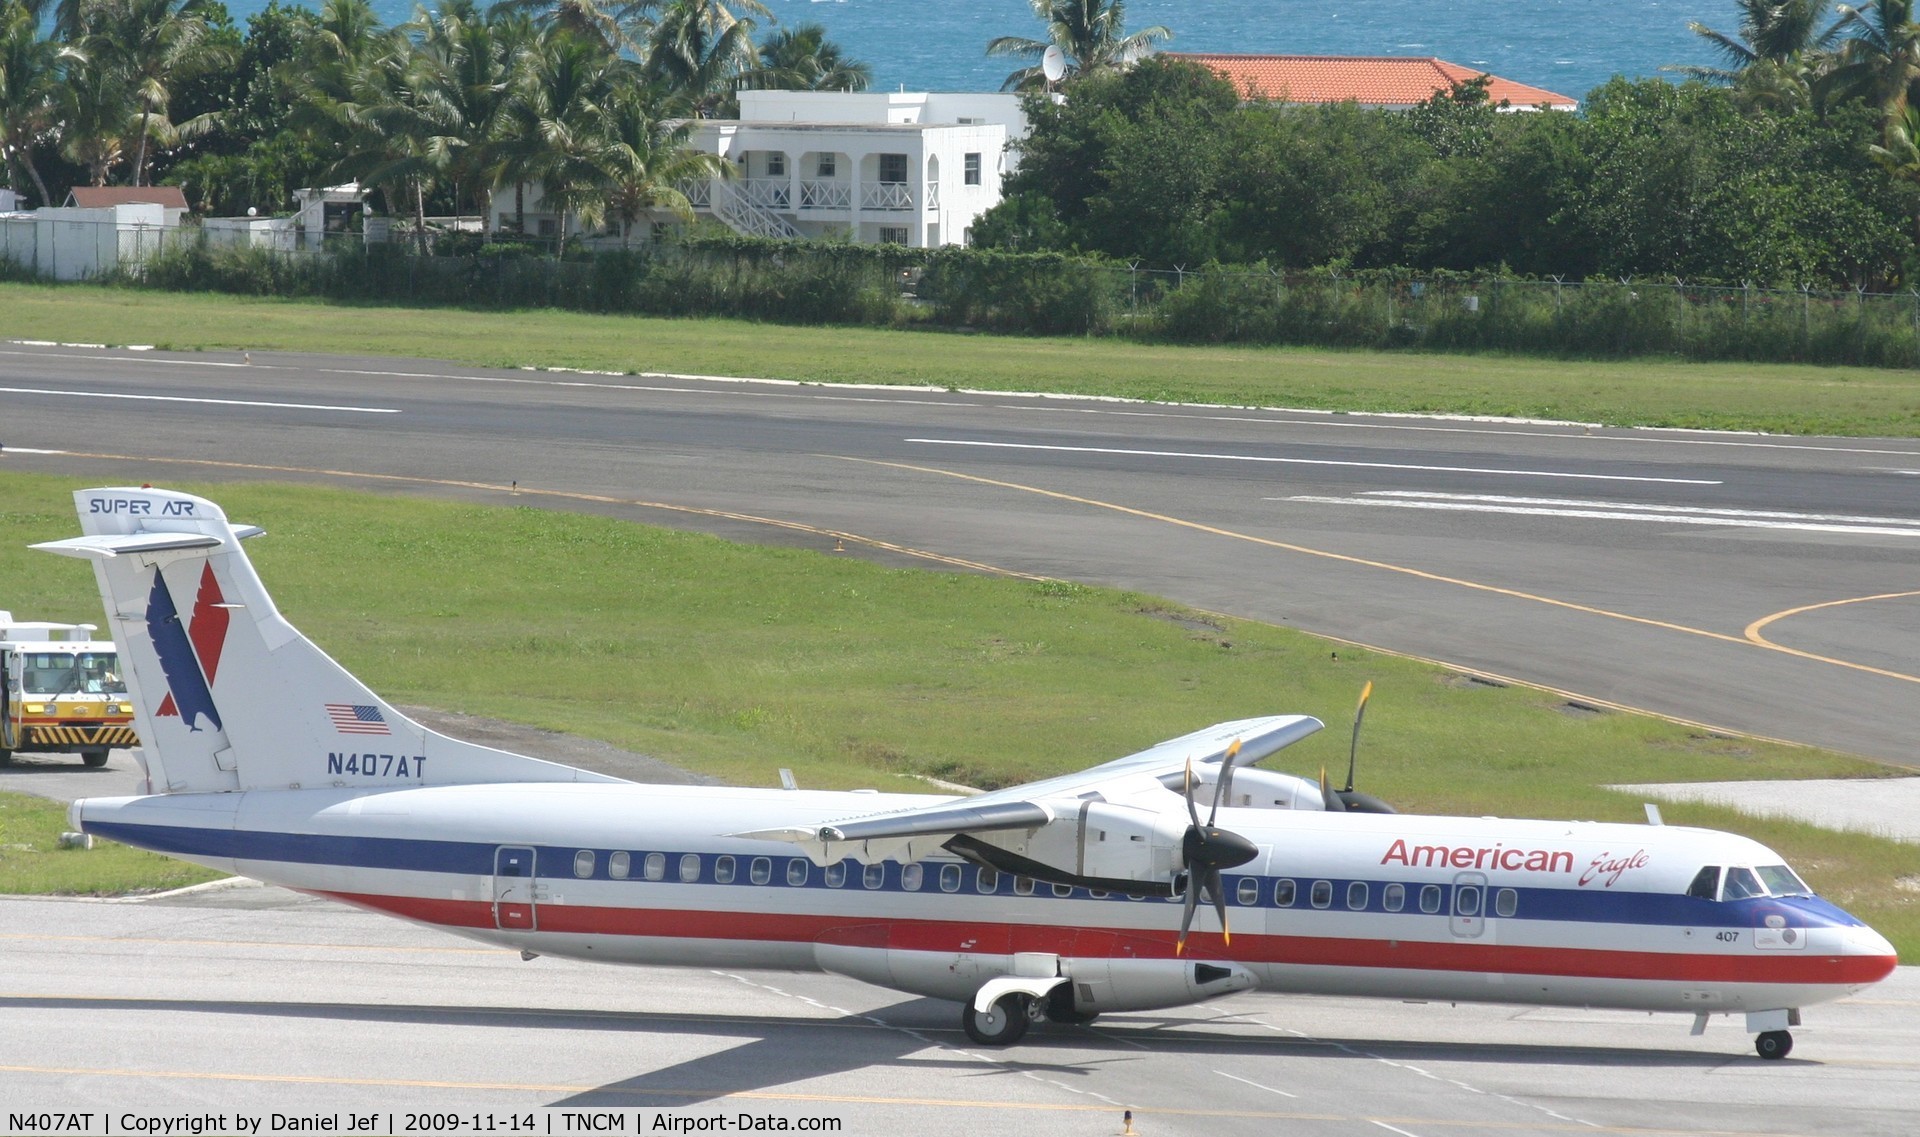 N407AT, 1994 ATR 72-212 C/N 407, american eagle taxing to holding point A